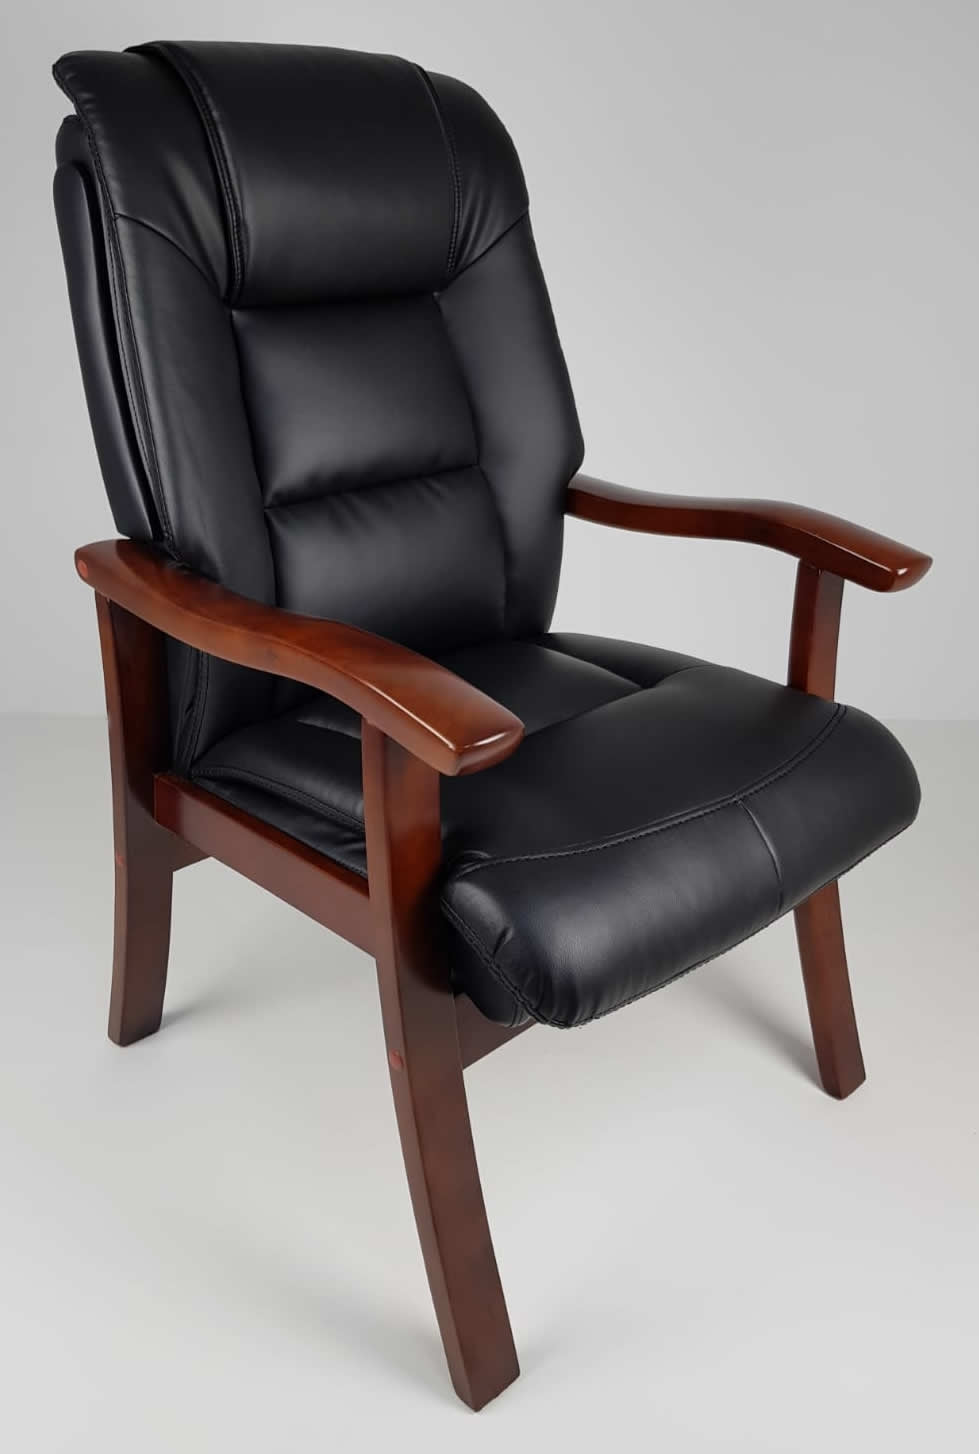 Visitor Chair Black Leather with Walnut Arms - CHA-1830C Huddersfield